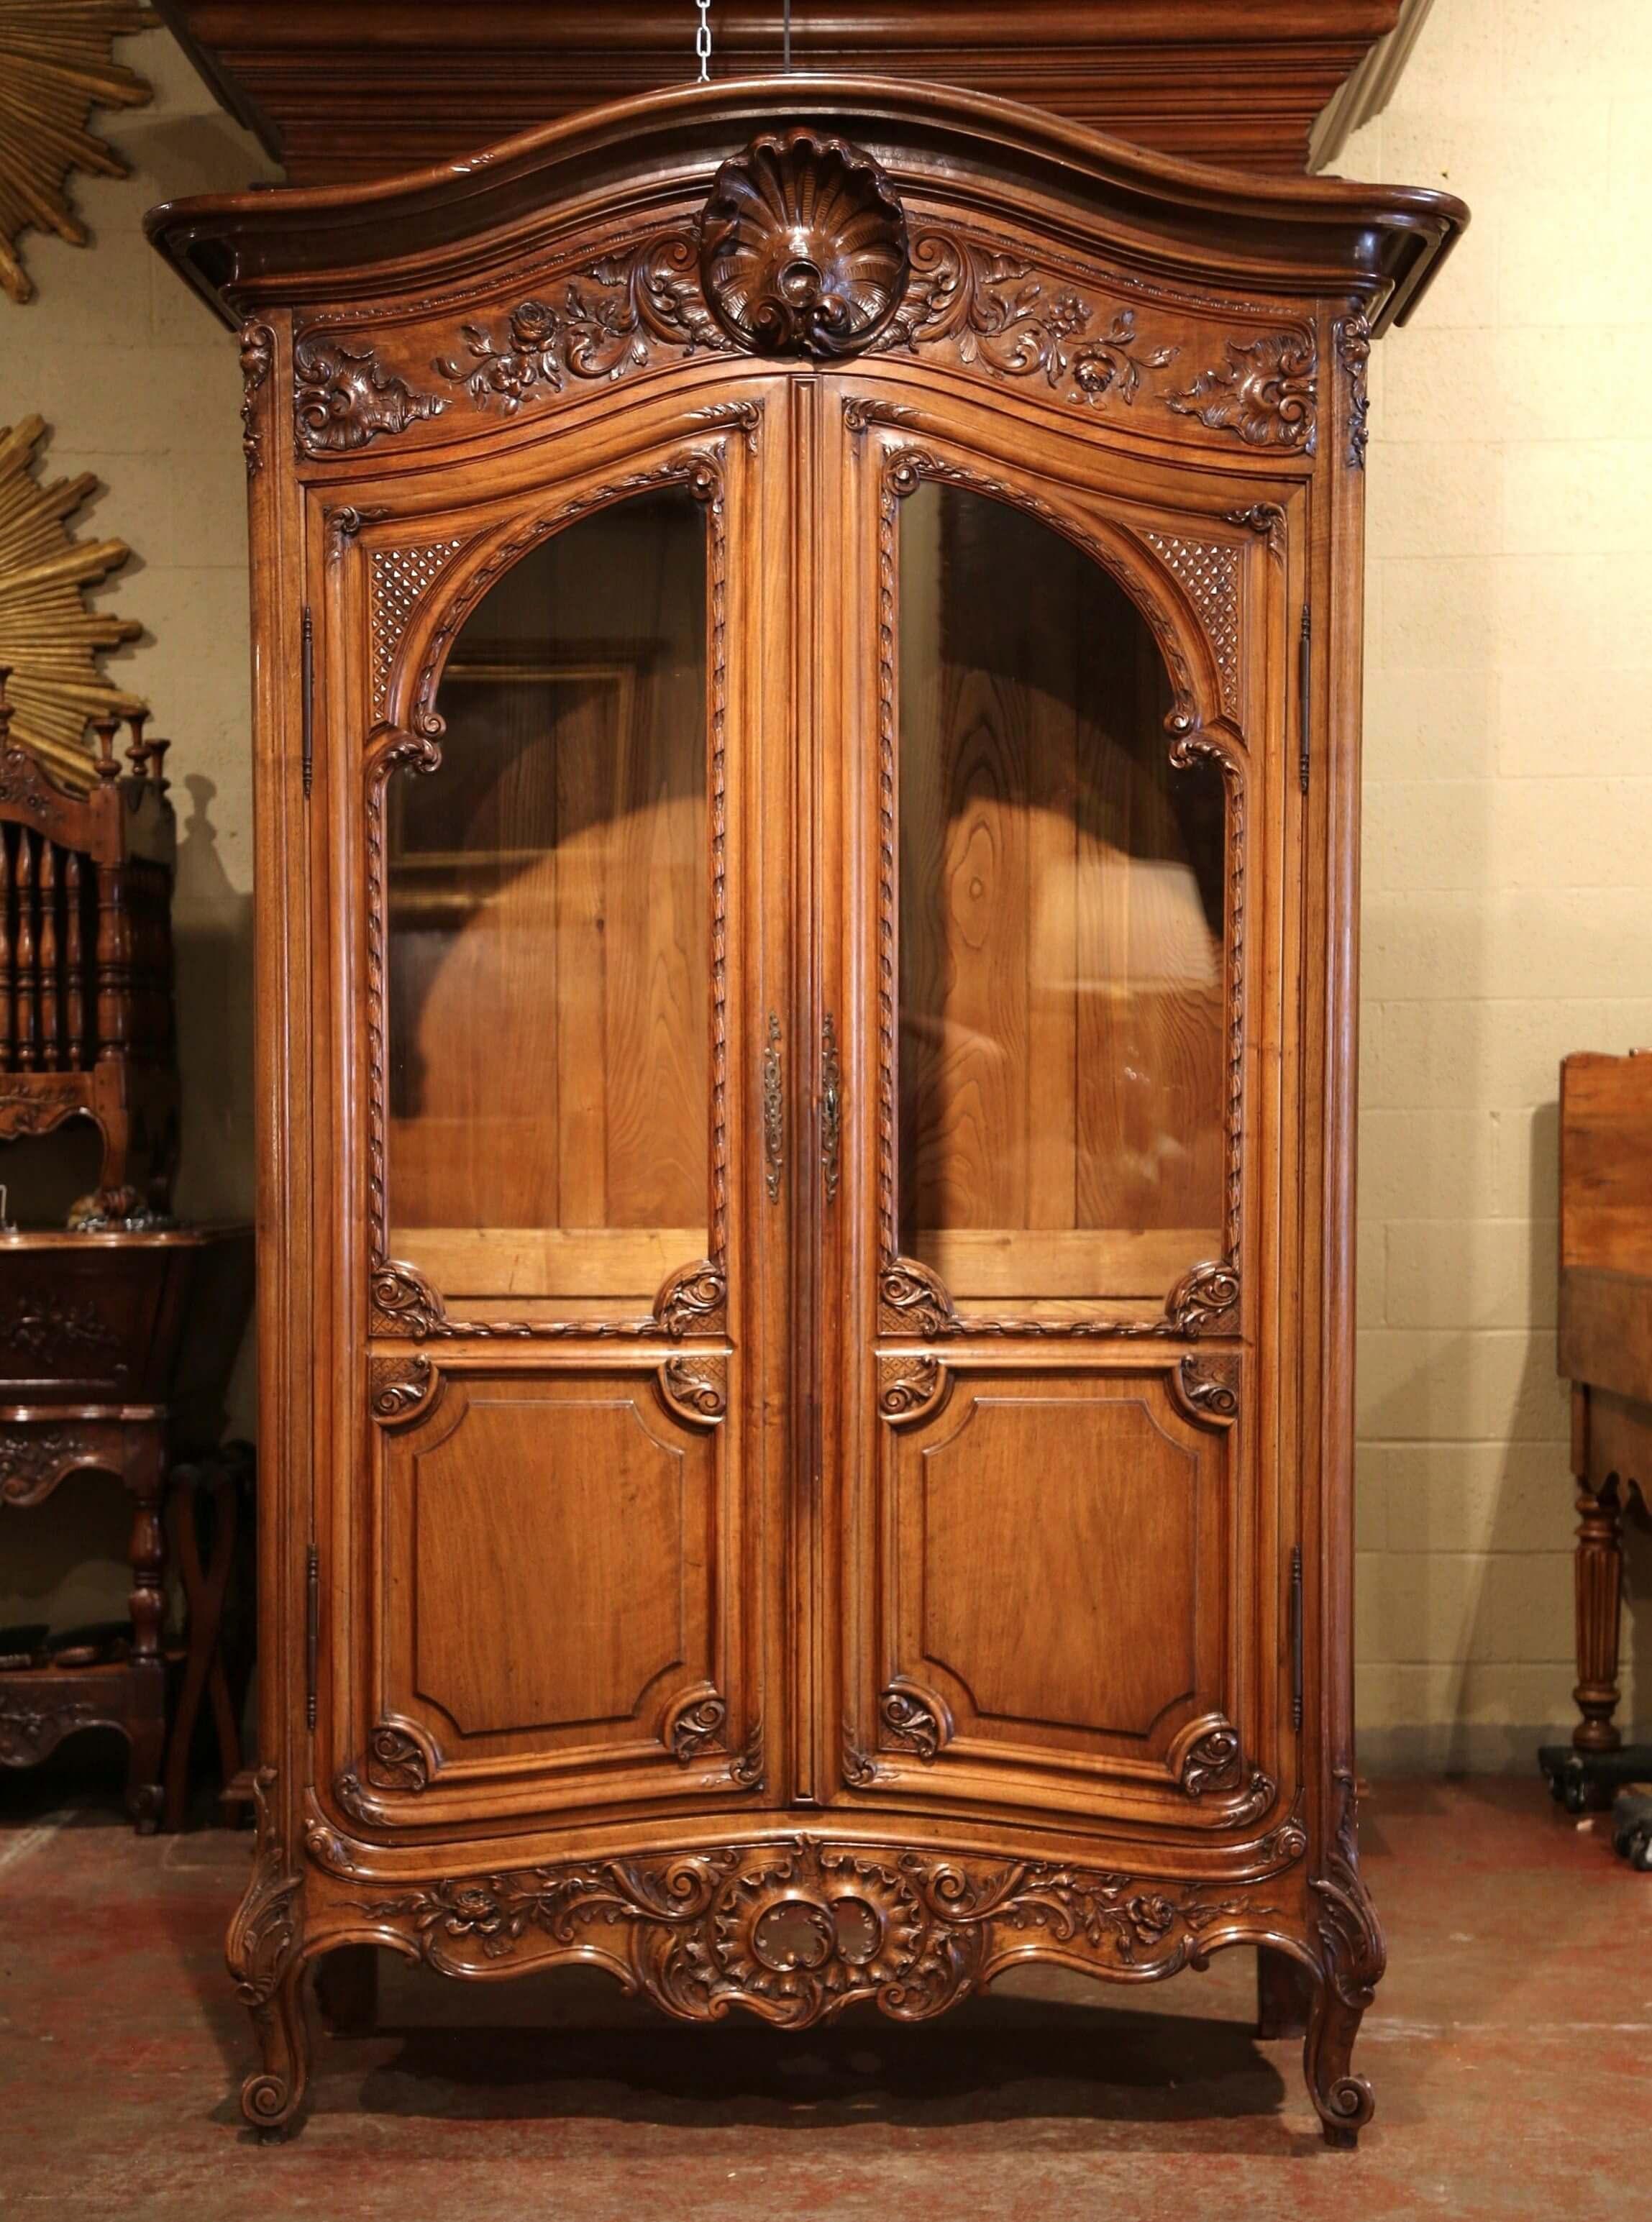 This antique cabinet was crafted in southern France, circa 1890. The armoire sits on scrolled feet decorated with hand carved acanthus leaves over a very ornate apron embellished with a pierced center shell, and floral and leaf decor. The bonnet top